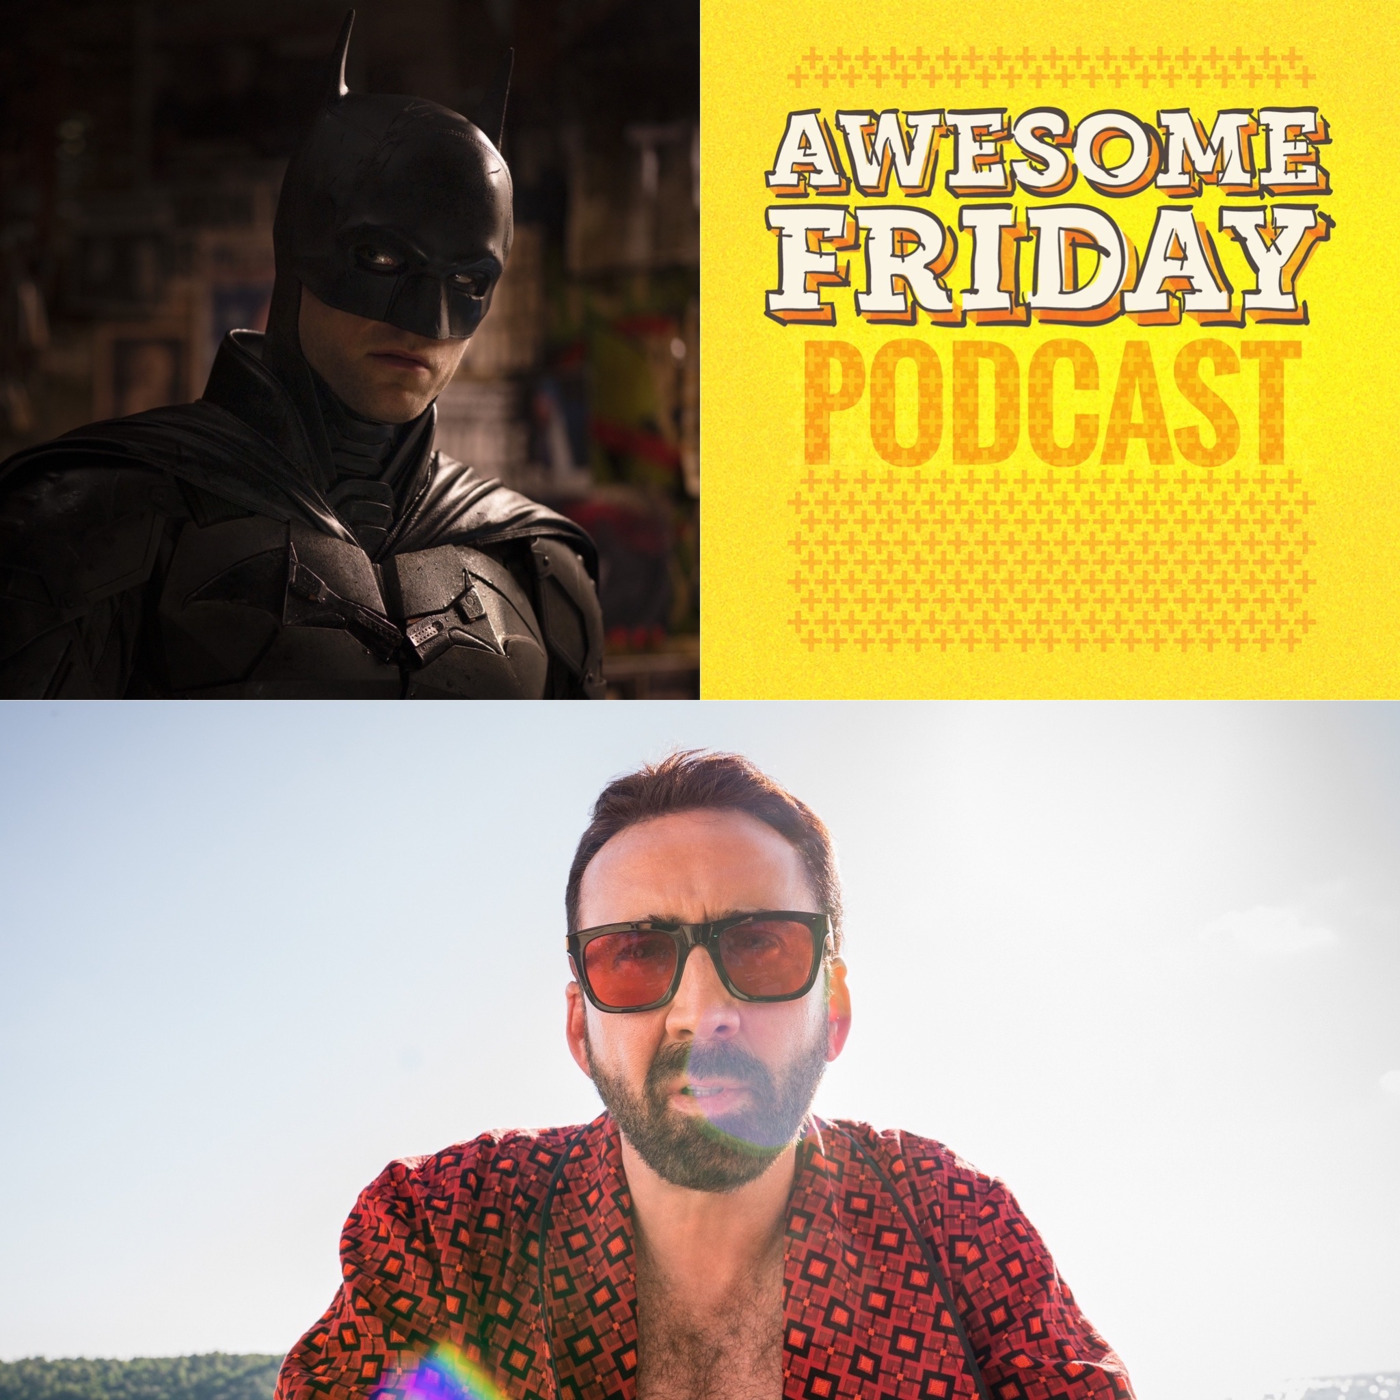 Episode 45: The Batman & The Unbearable Weight of Massive Talent